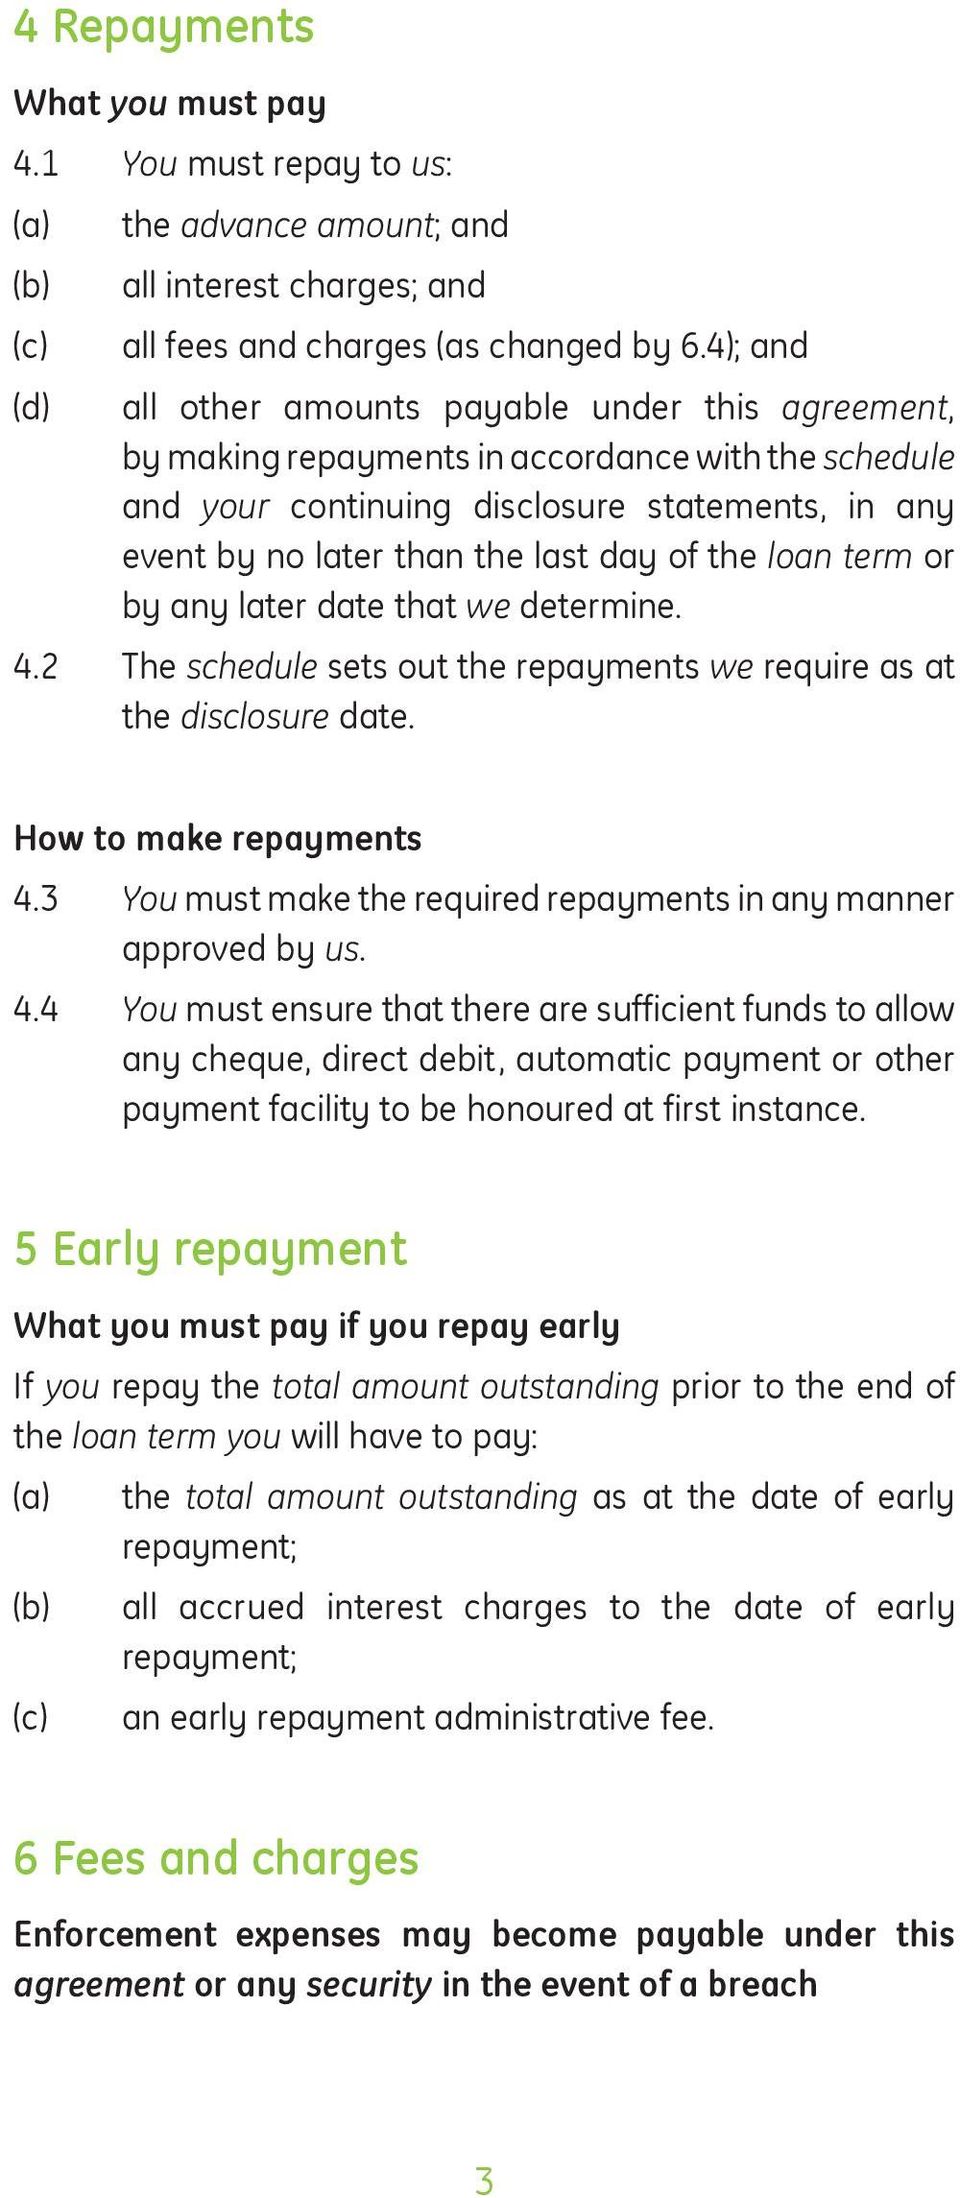 the loan term or by any later date that we determine. 4.2 The schedule sets out the repayments we require as at the disclosure date. How to make repayments 4.